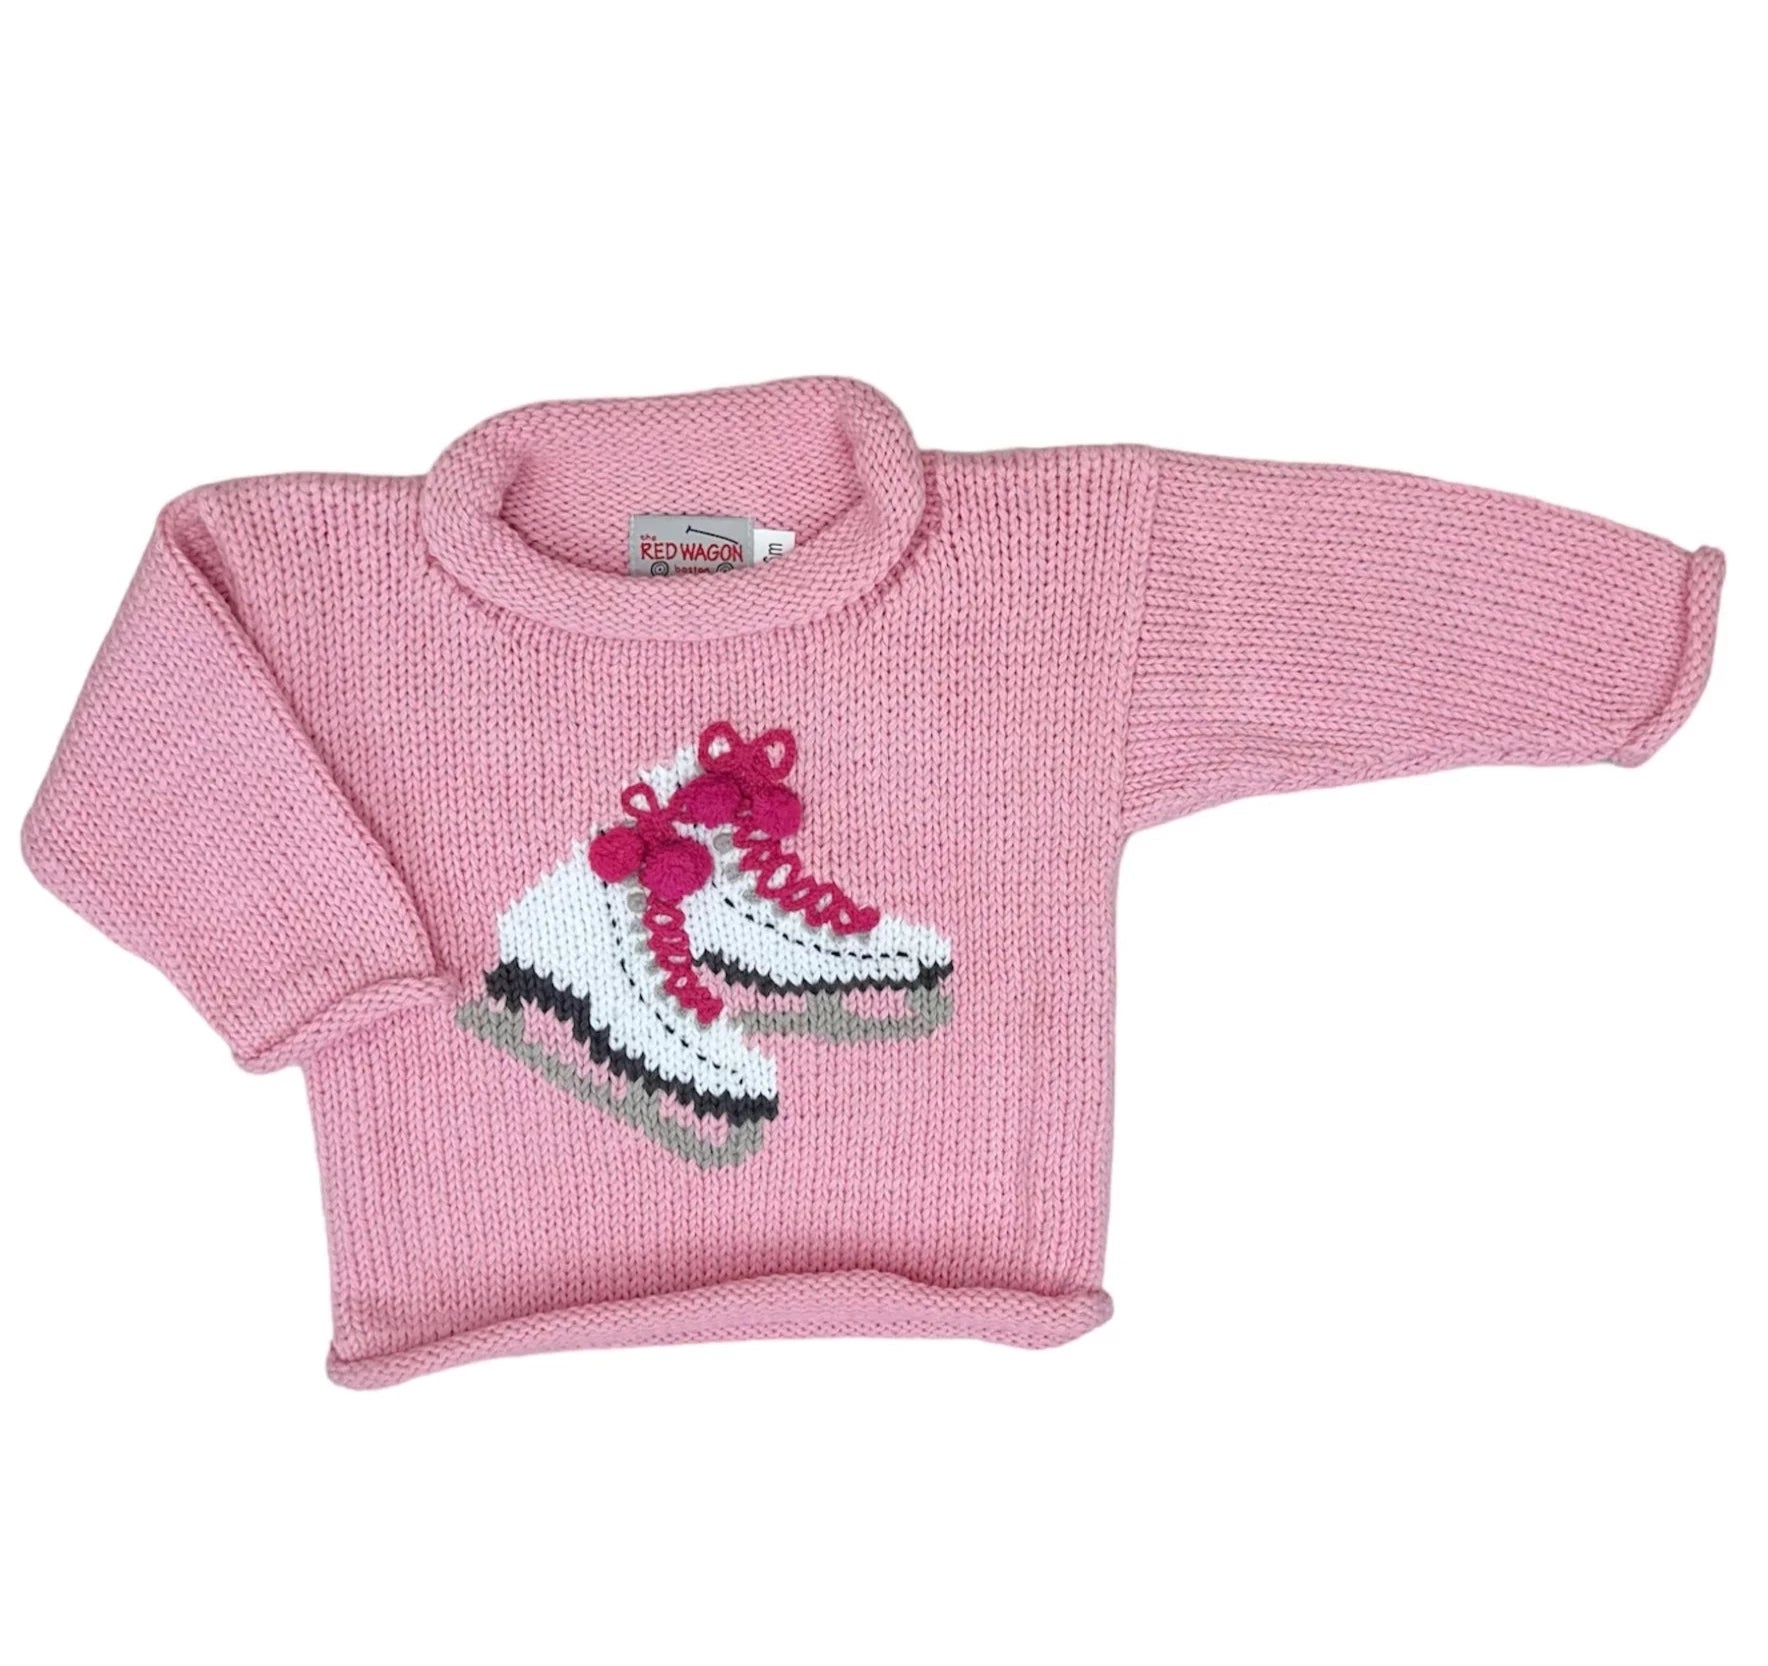 pink sweater with ice skates on it